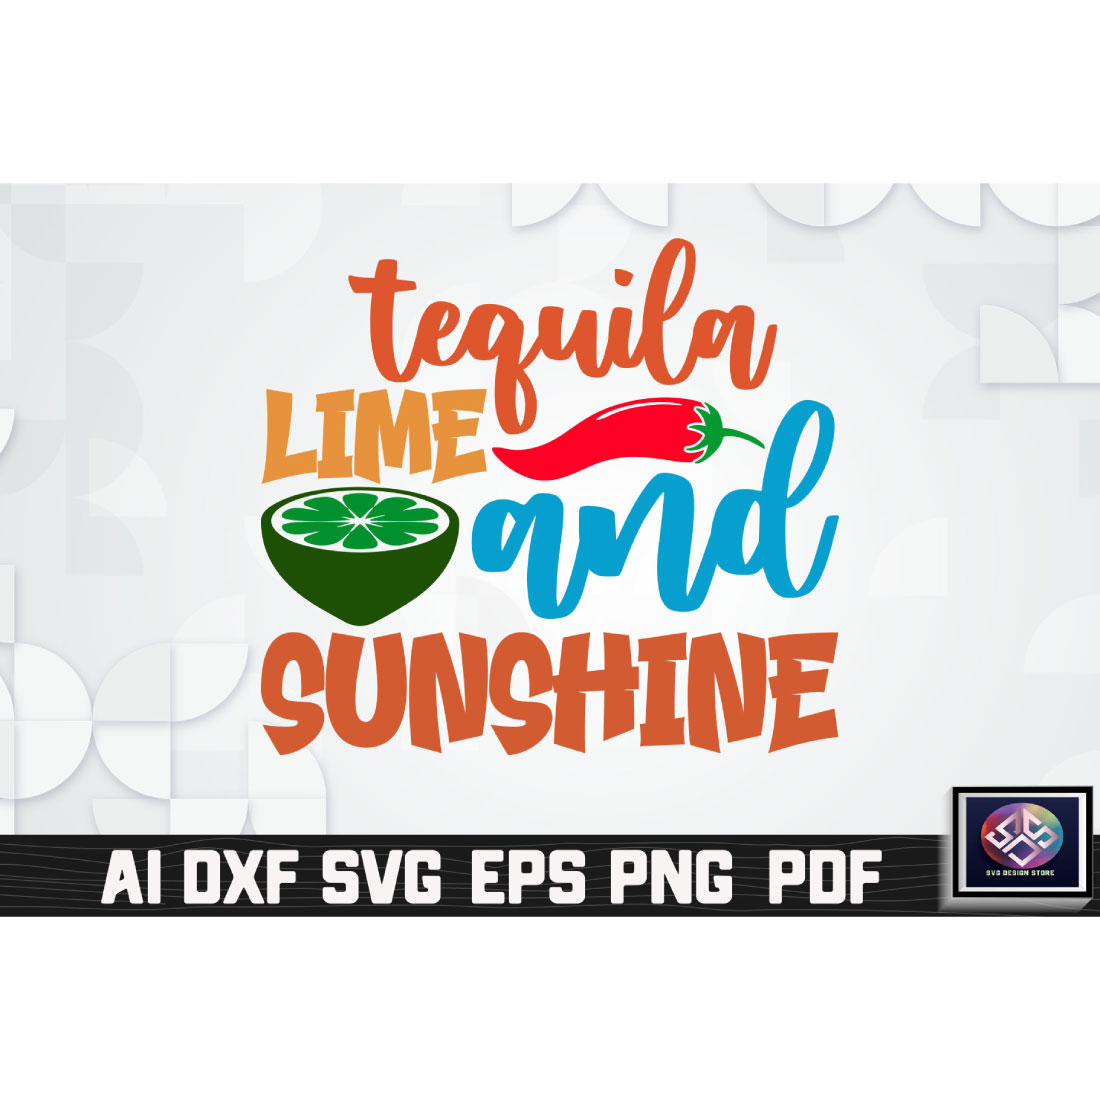 Tequila Lime And Sunshine cover image.